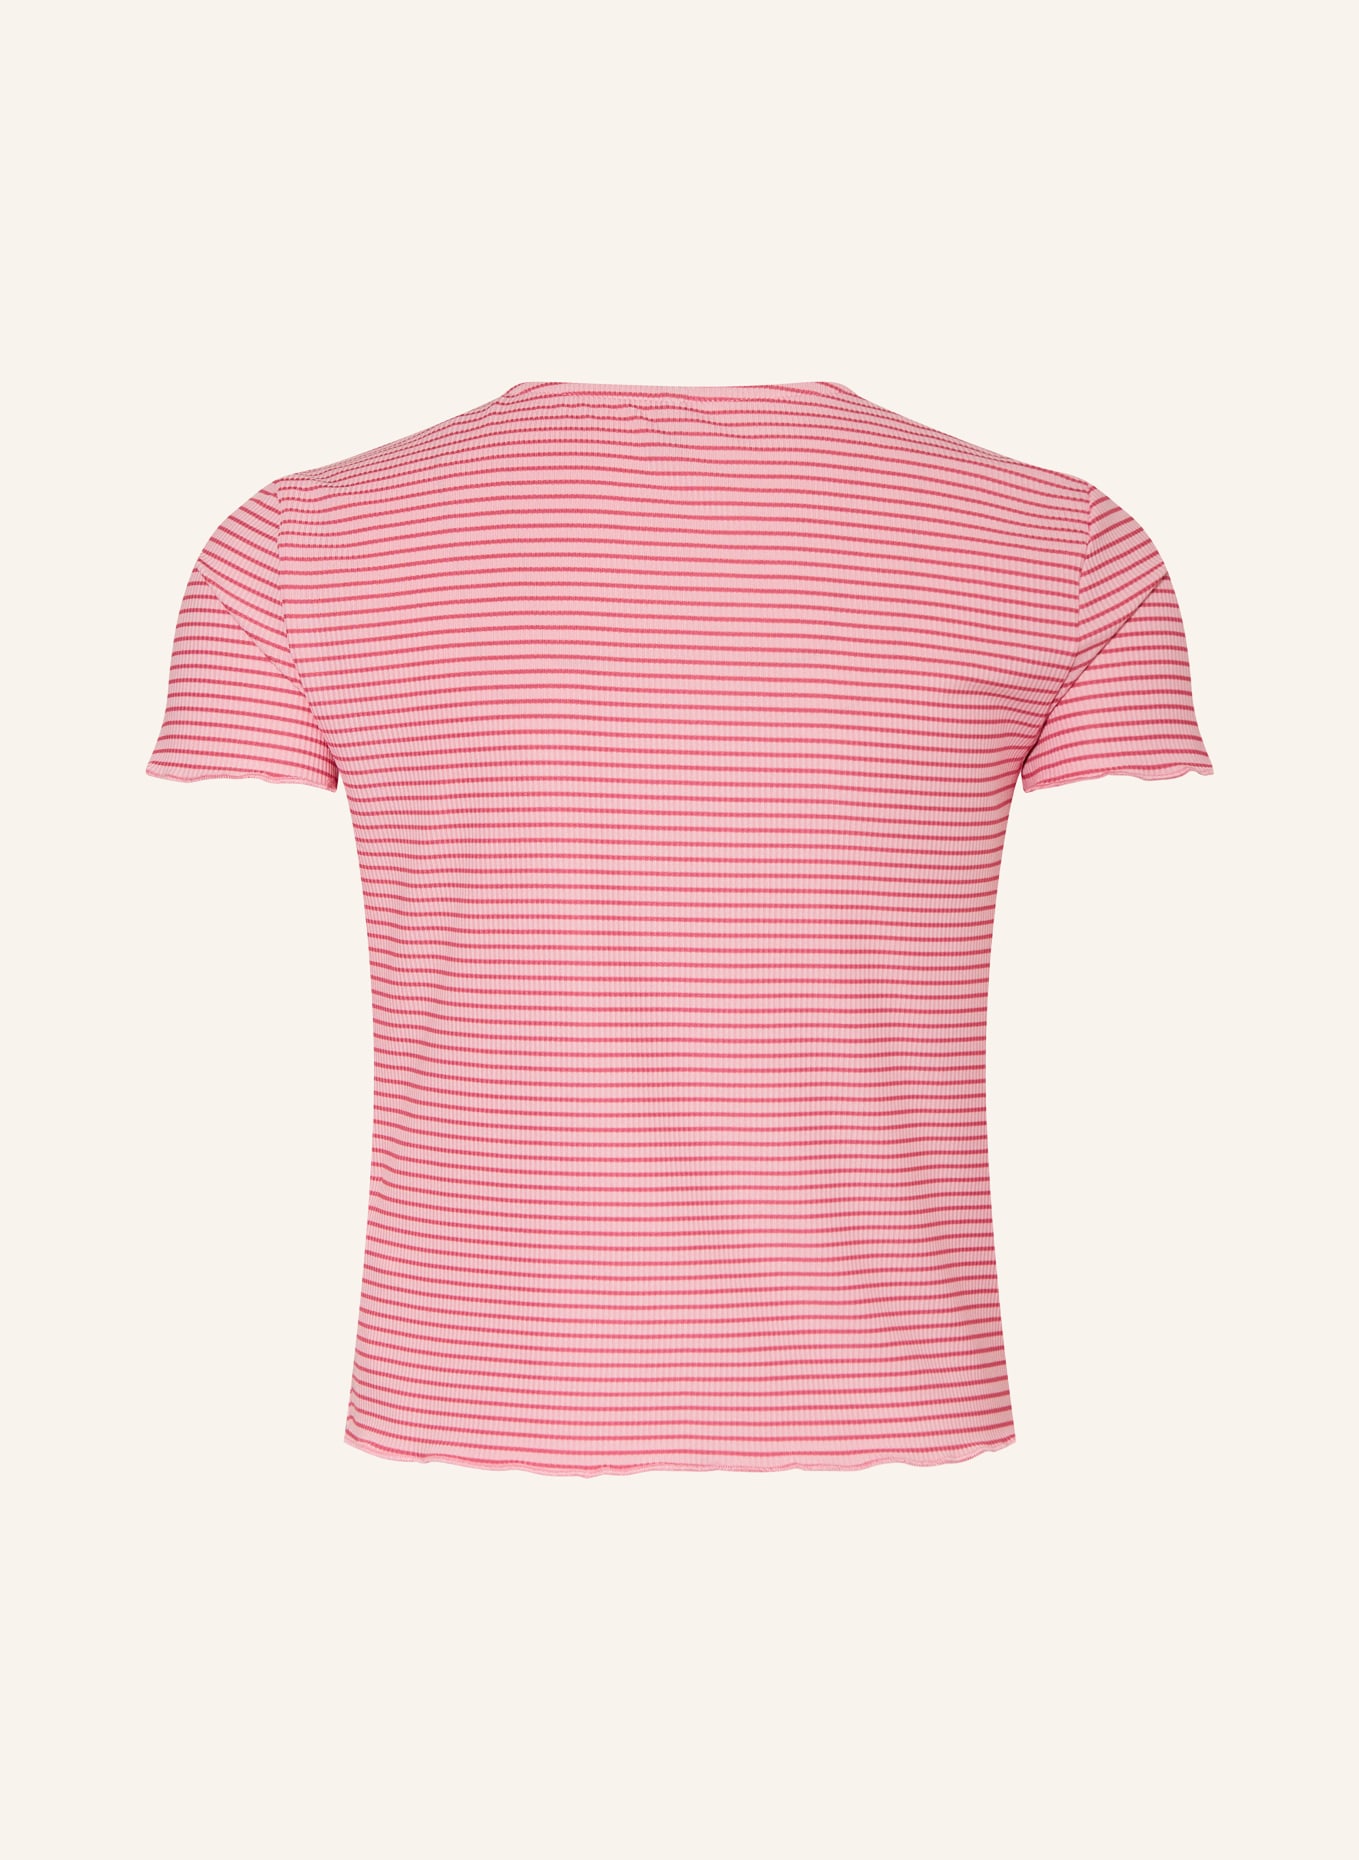 ONLY T-Shirt, Farbe: PINK/ ROSA (Bild 2)